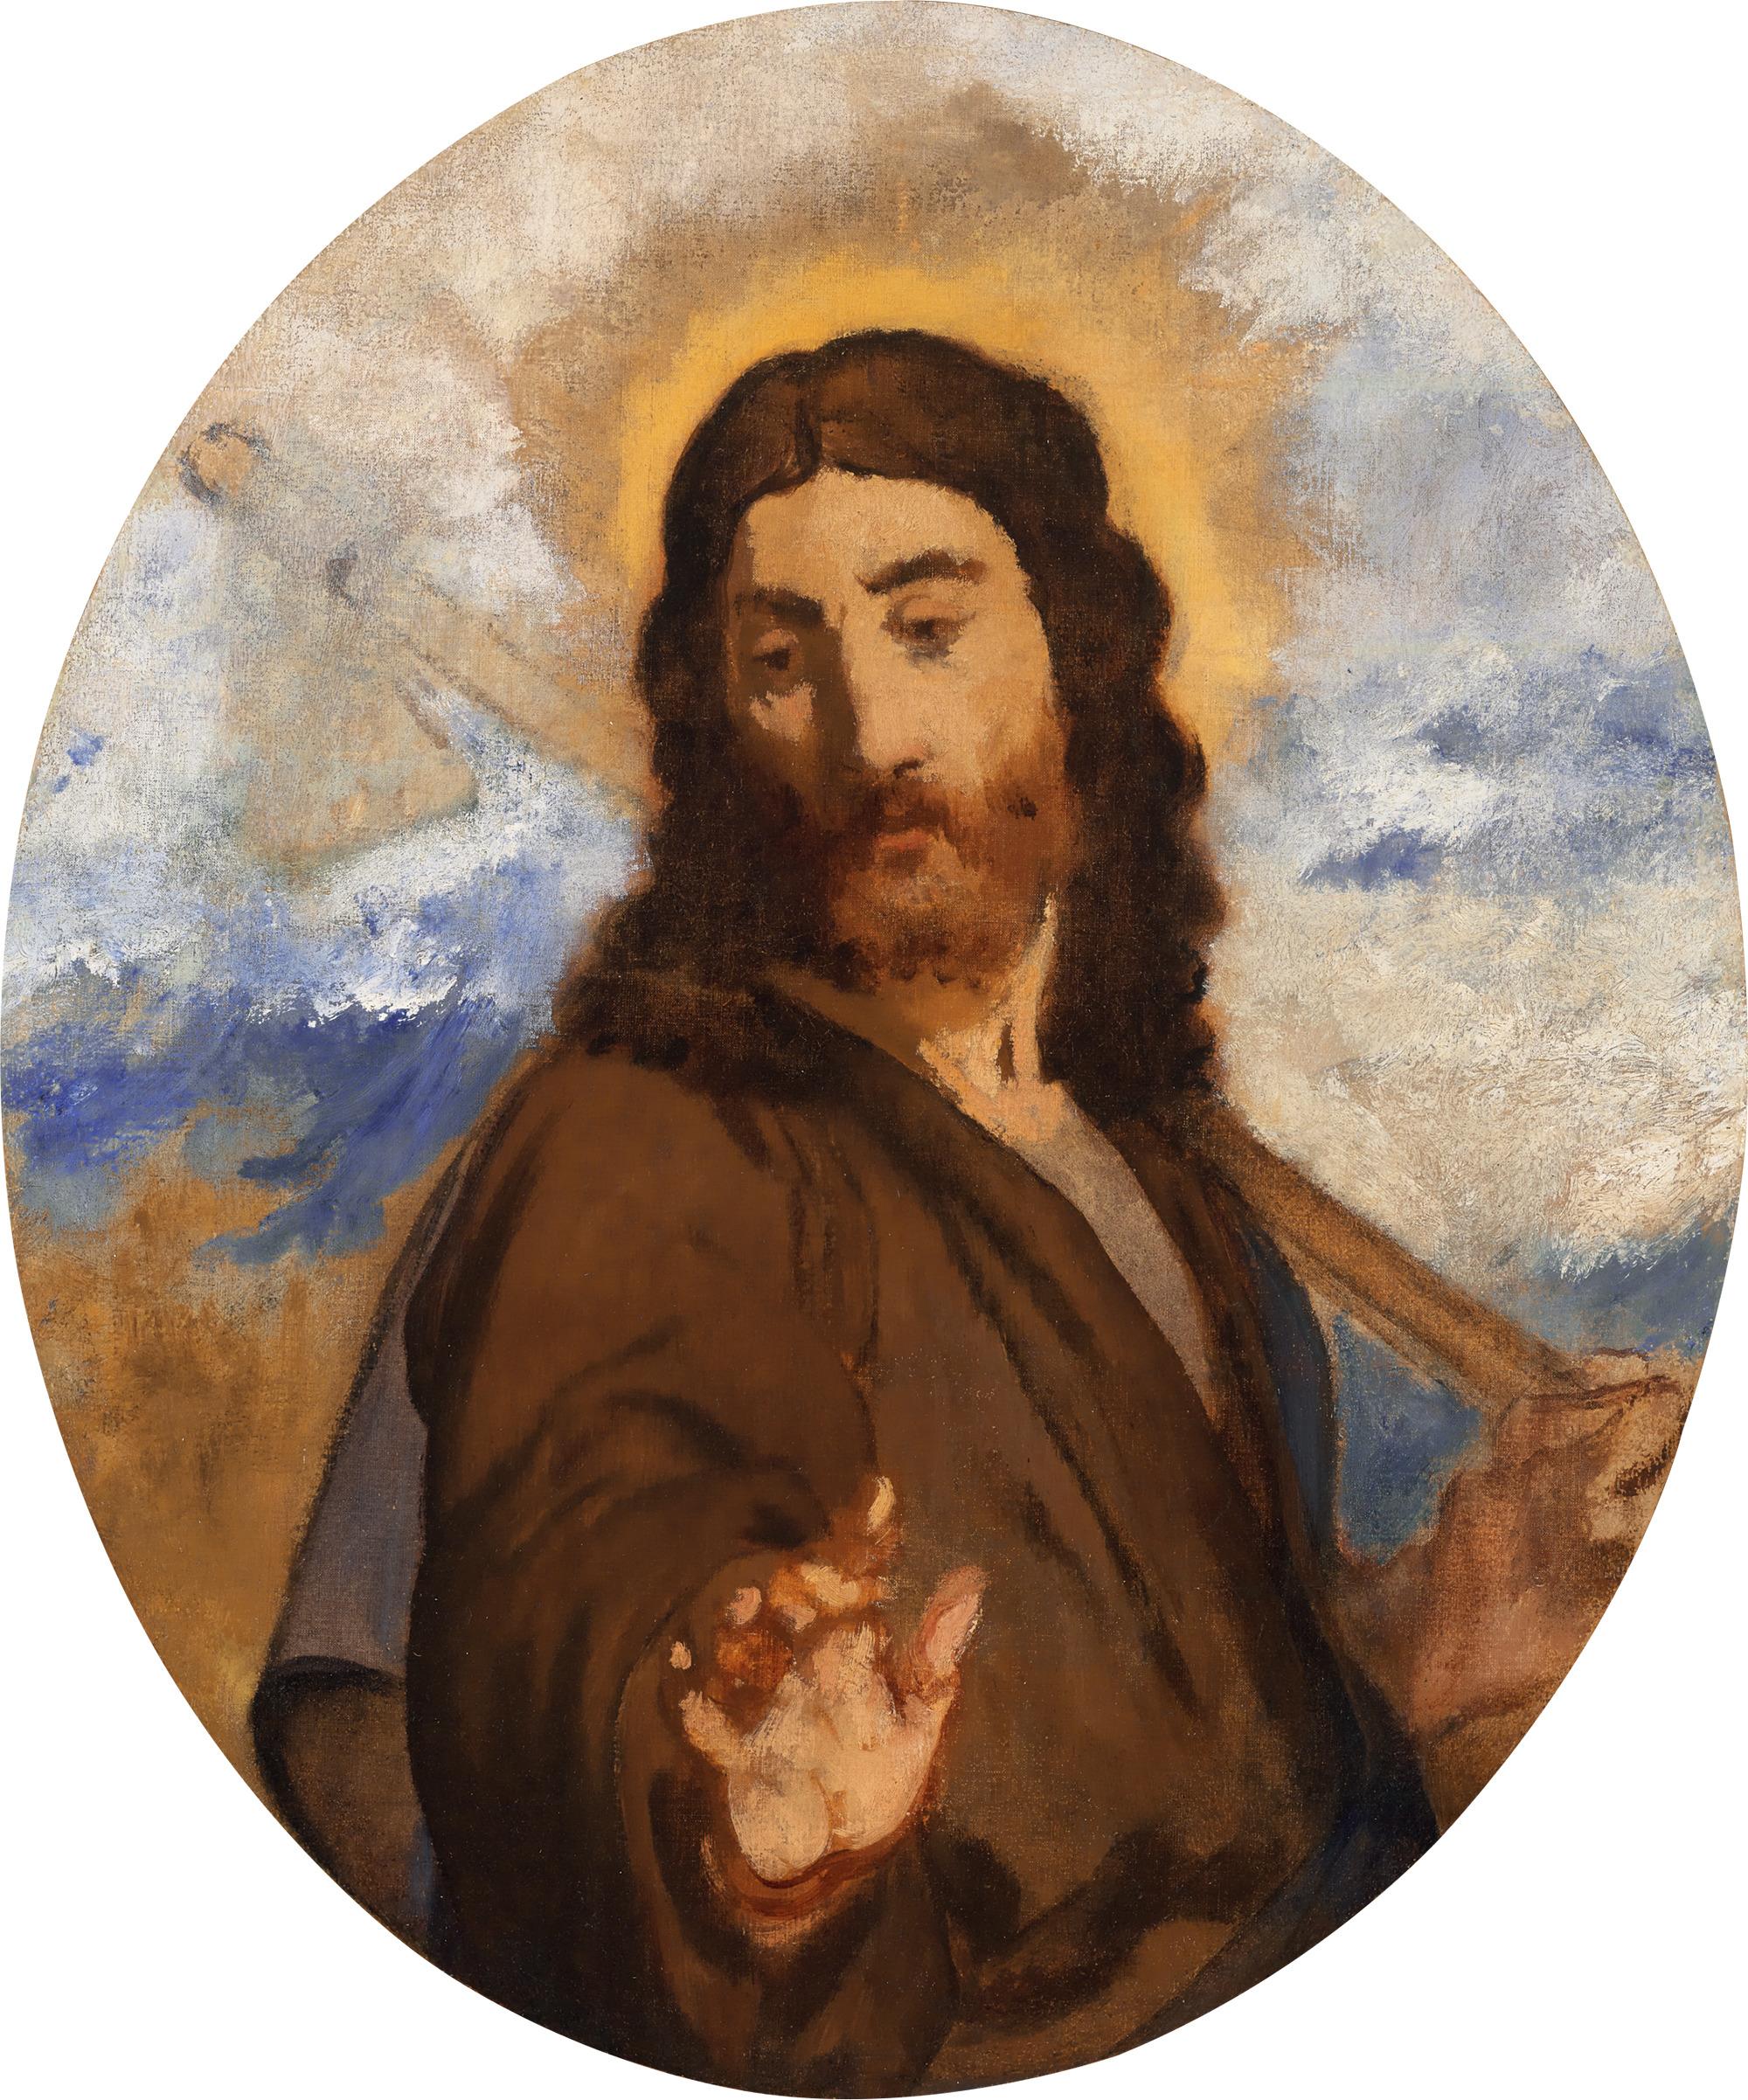 Edouard Manet
1832-1883  French

Christ as a Gardener

Oil on canvas

Beloved for his invaluable role in the development of the Impressionist movement, Edouard Manet's artworks are foundational to the canon of art history. The revolutionary artist's